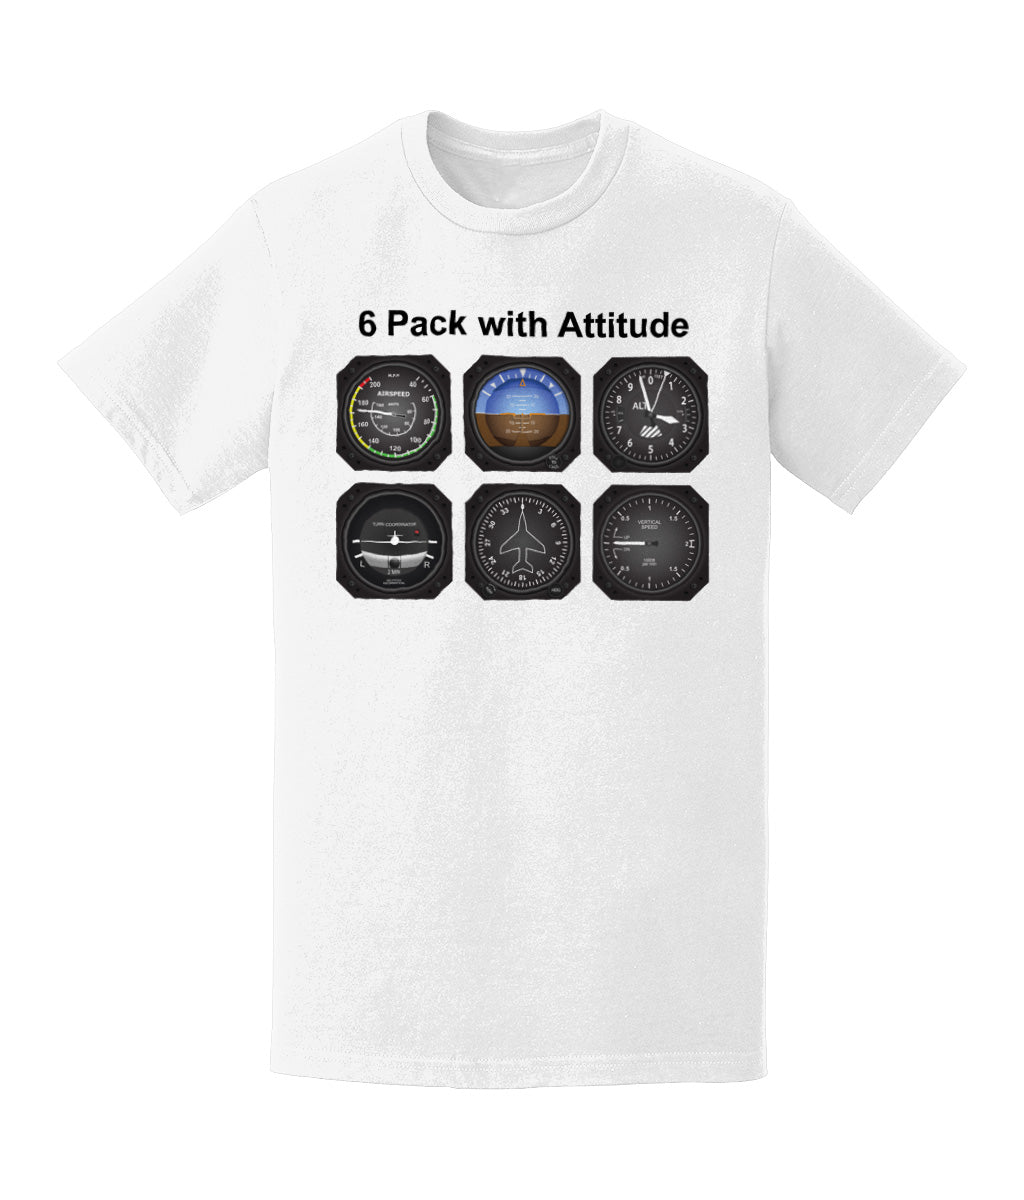 6 Pack with Attitude T-Shirt